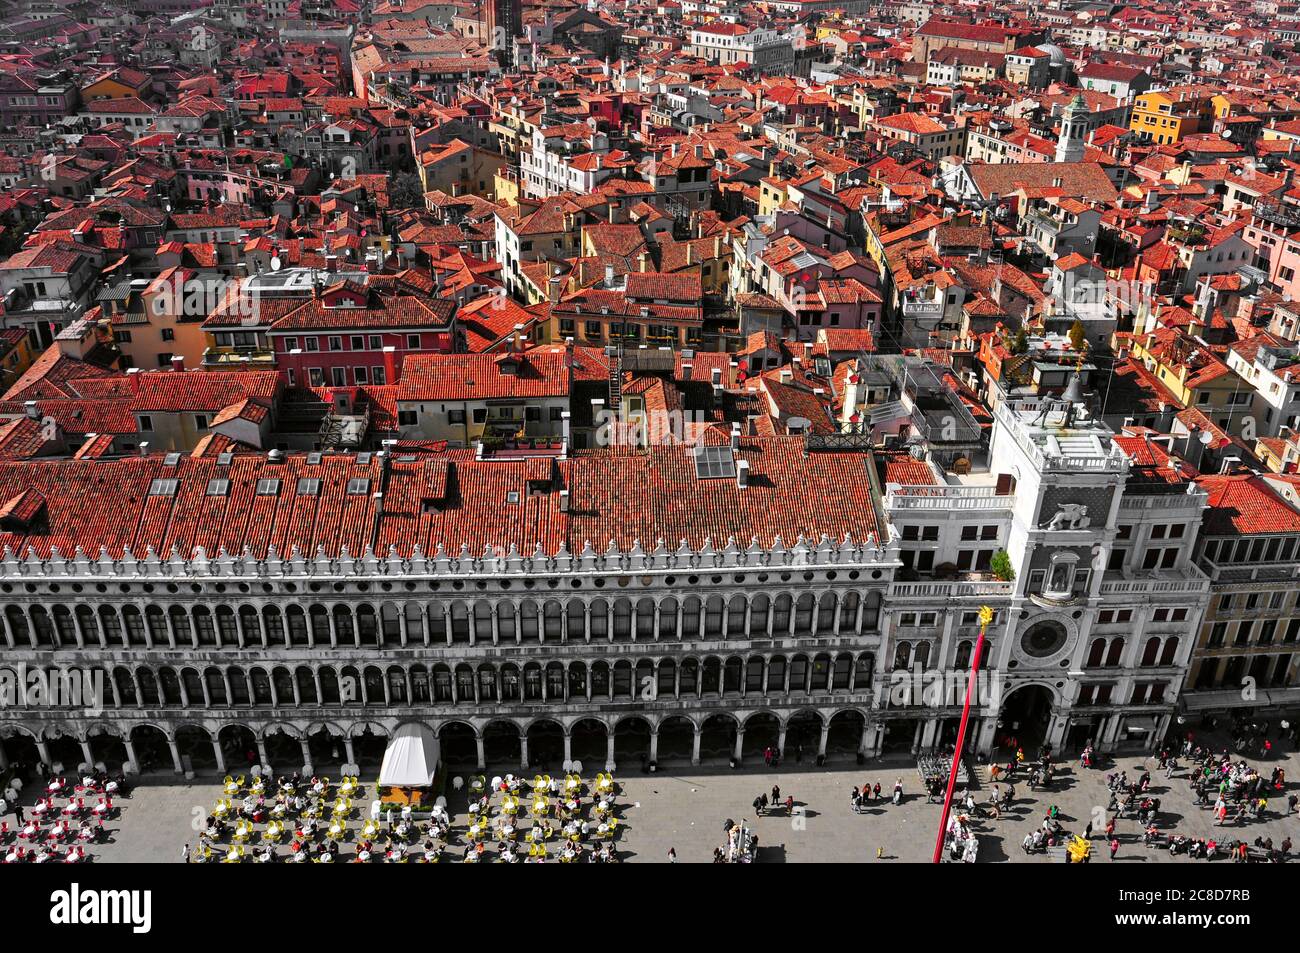 VENICE, ITALY - APRIL 12: Aerial view of Piazza San Marco on April 12, 2013 in Venice, Italy. Piazza San Marco is the main landmark in the city, which Stock Photo